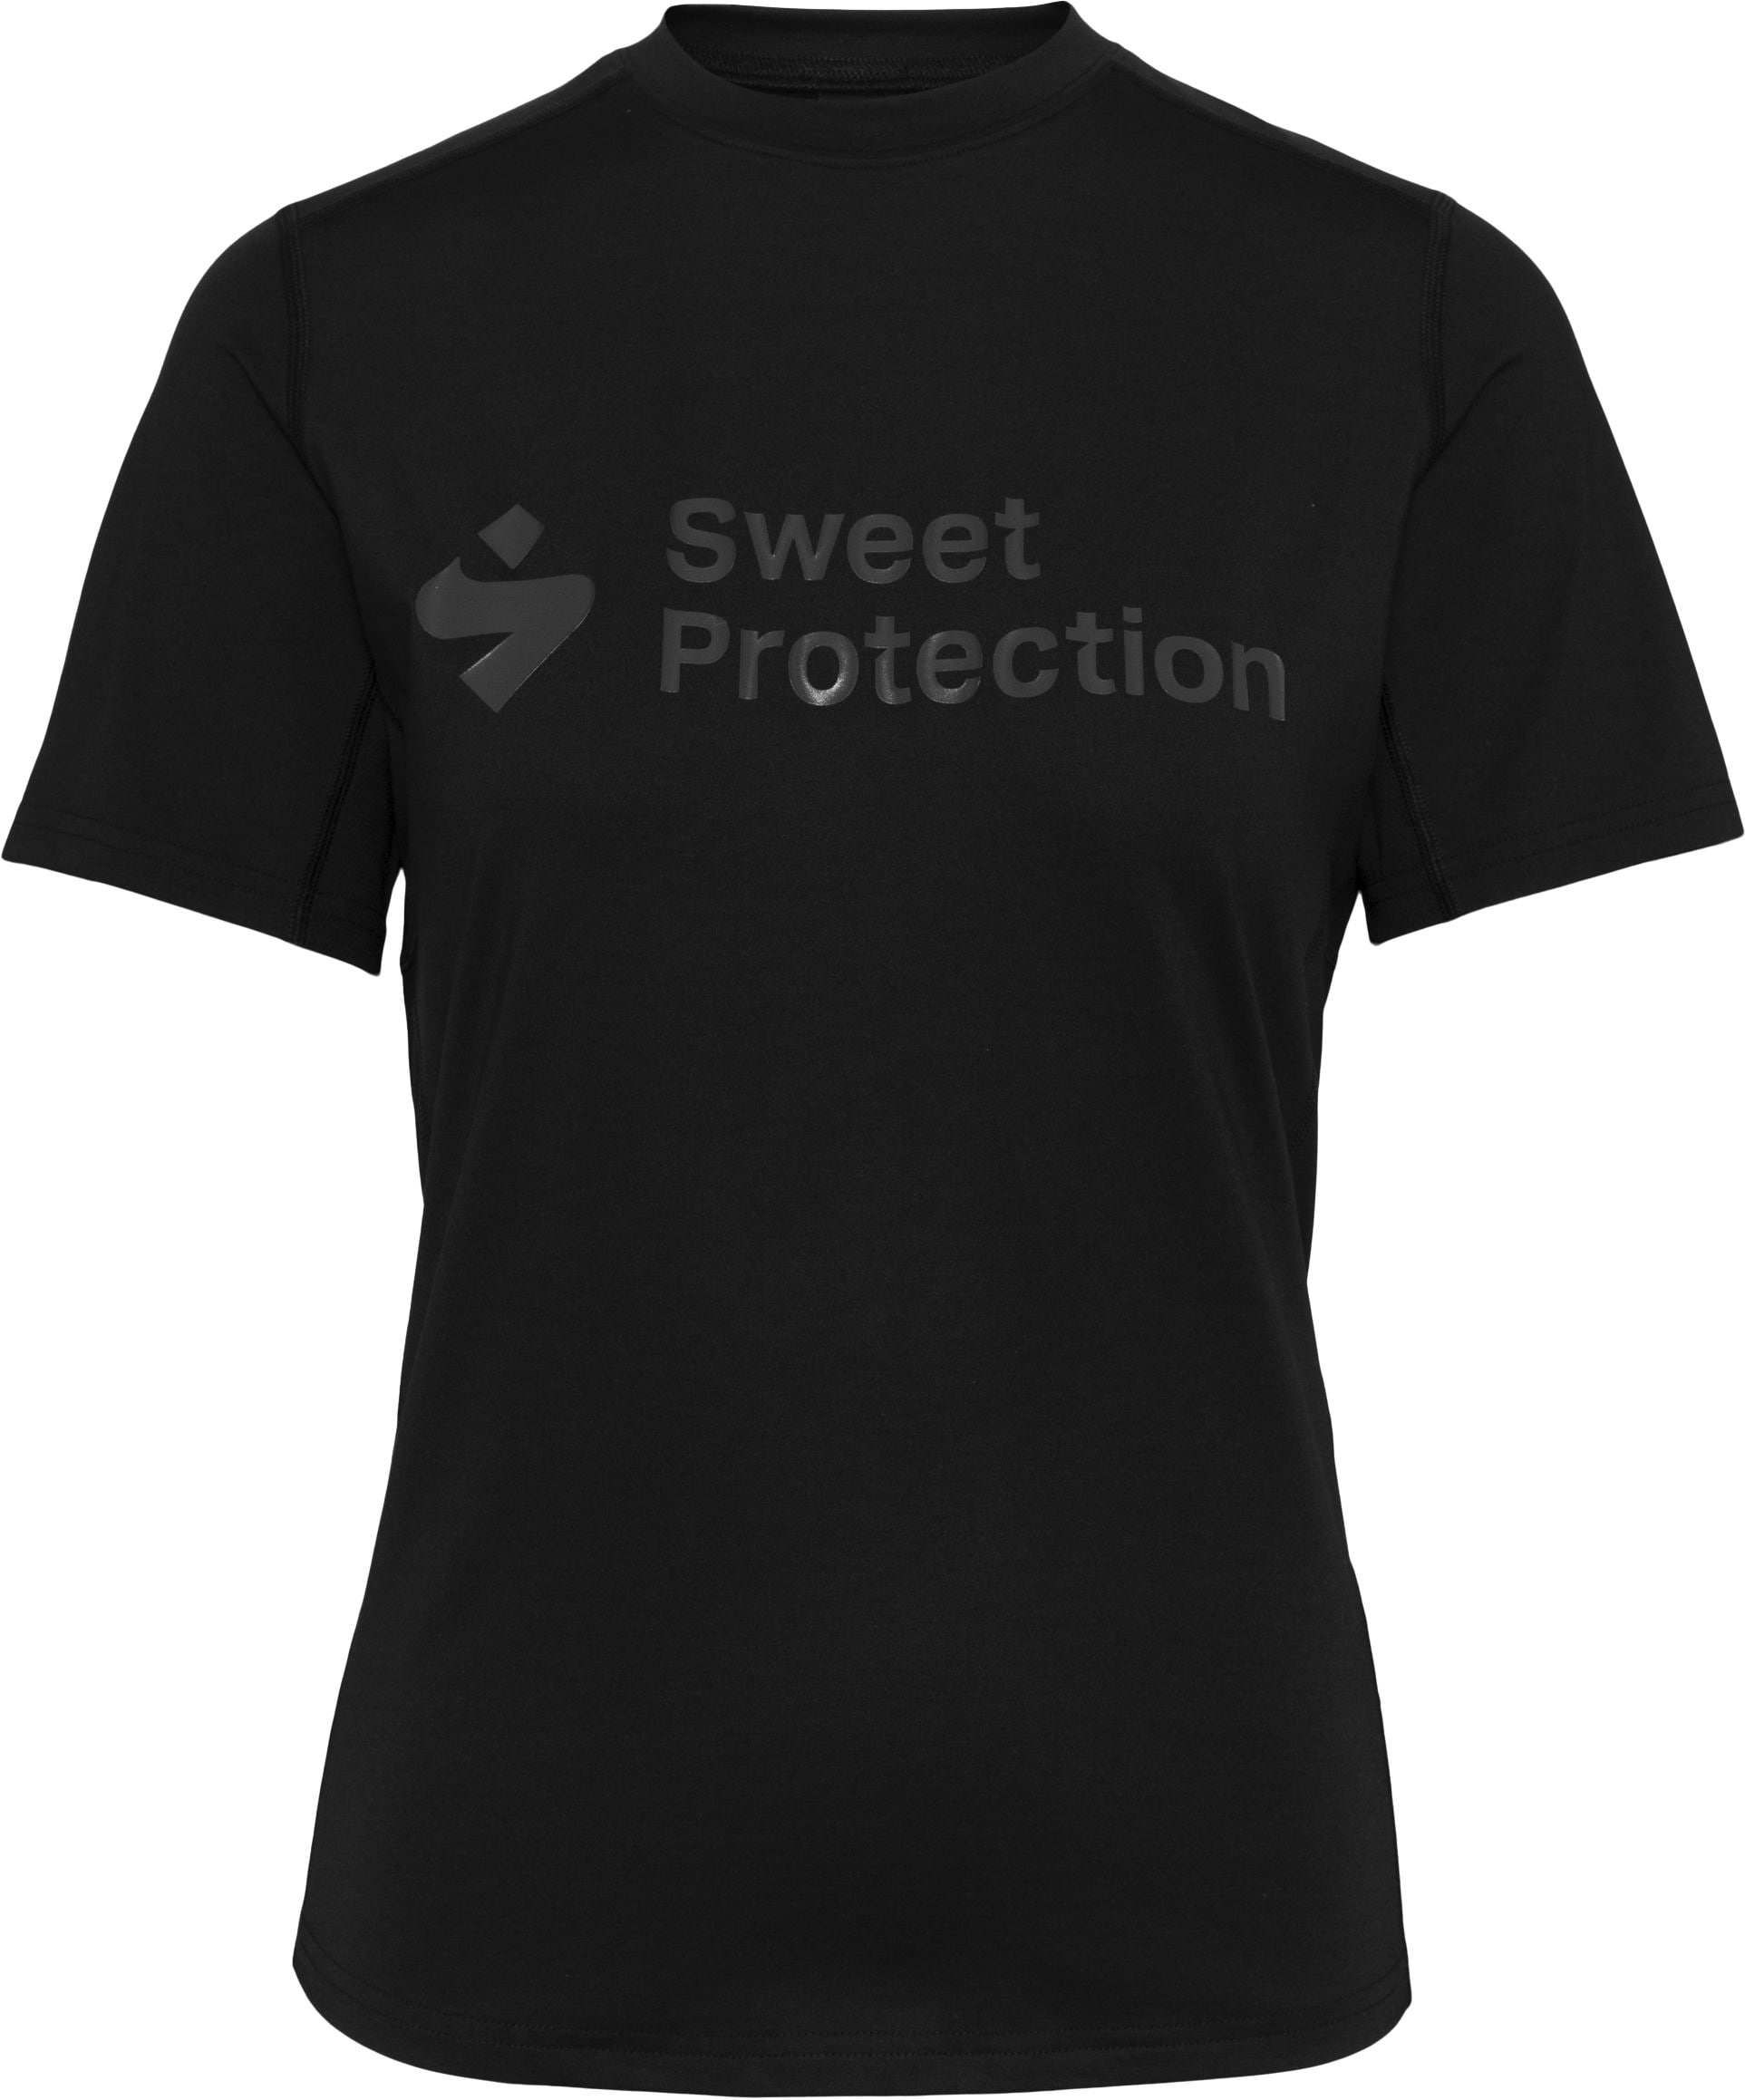 SWEET PROTECTION, Hunter SS Jersey W